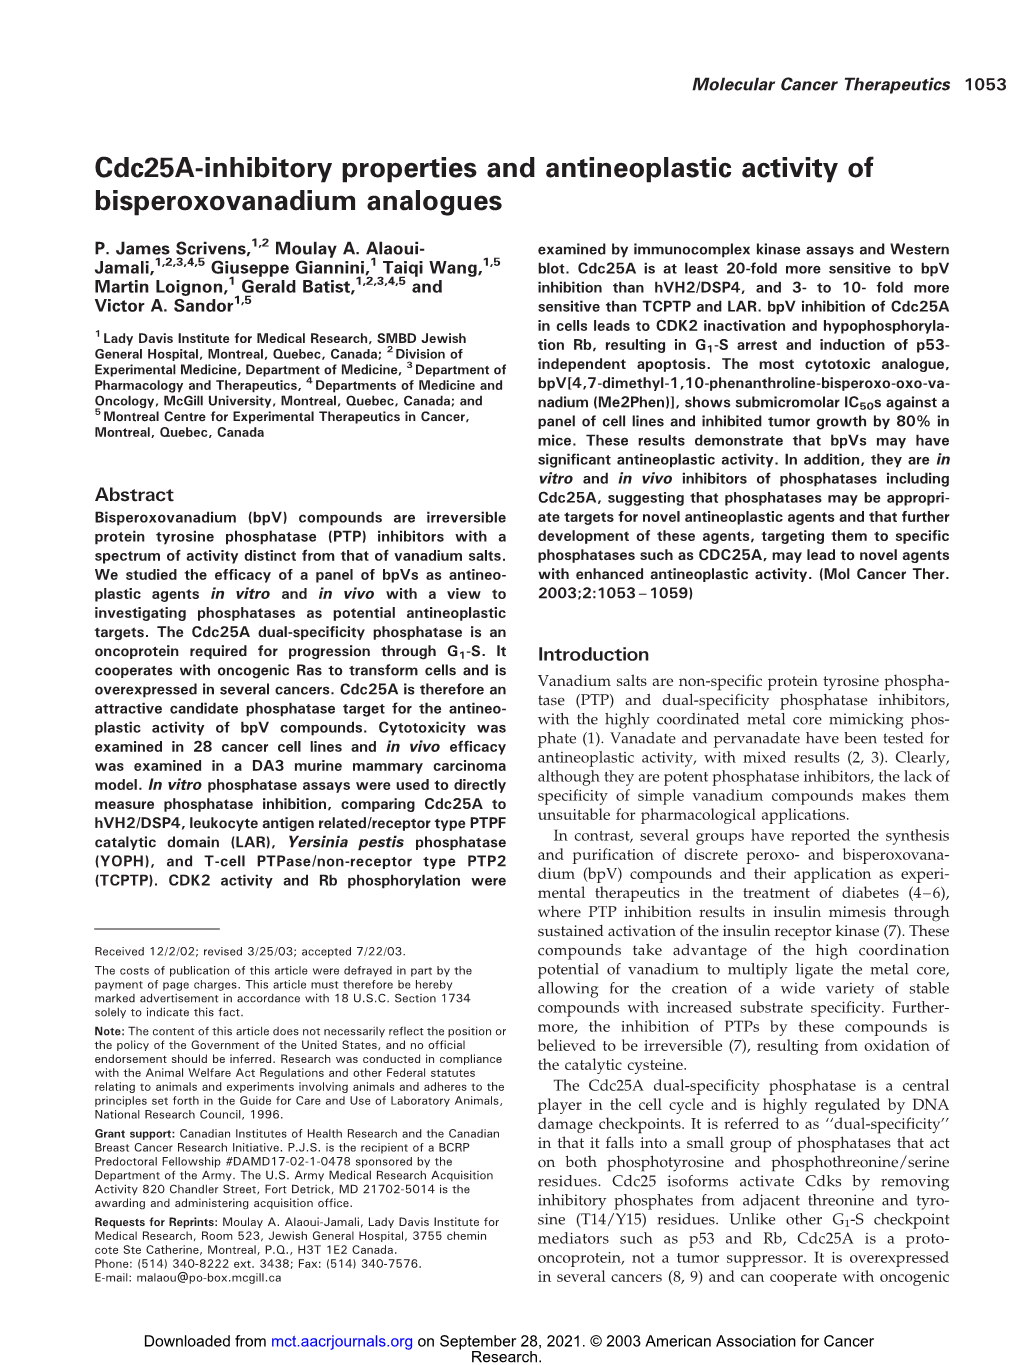 Cdc25a-Inhibitory Properties and Antineoplastic Activity of Bisperoxovanadium Analogues